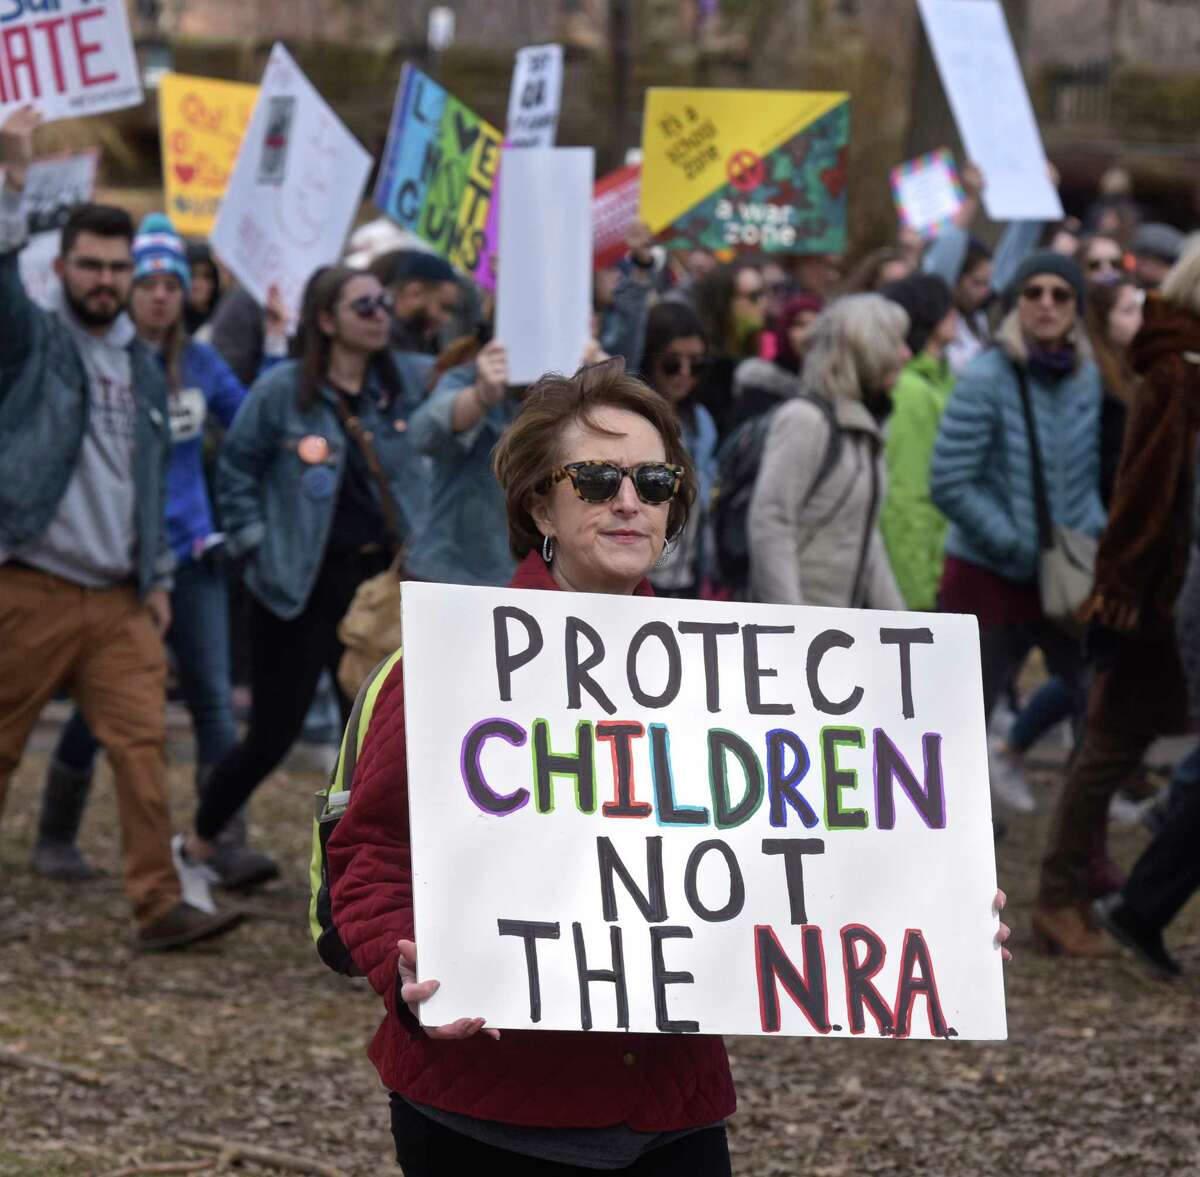 Photograph from the March for Our Lives rally, in Hartford, on Saturday, which an anti-gun-violence rally organized by students. At least nine marches are scheduled to take place in Connecticut in conjunction with the March for Our Lives in Washington, D.C., with hundreds more planned across the country. Saturday, March 24, 2018, in Hartford, Conn.